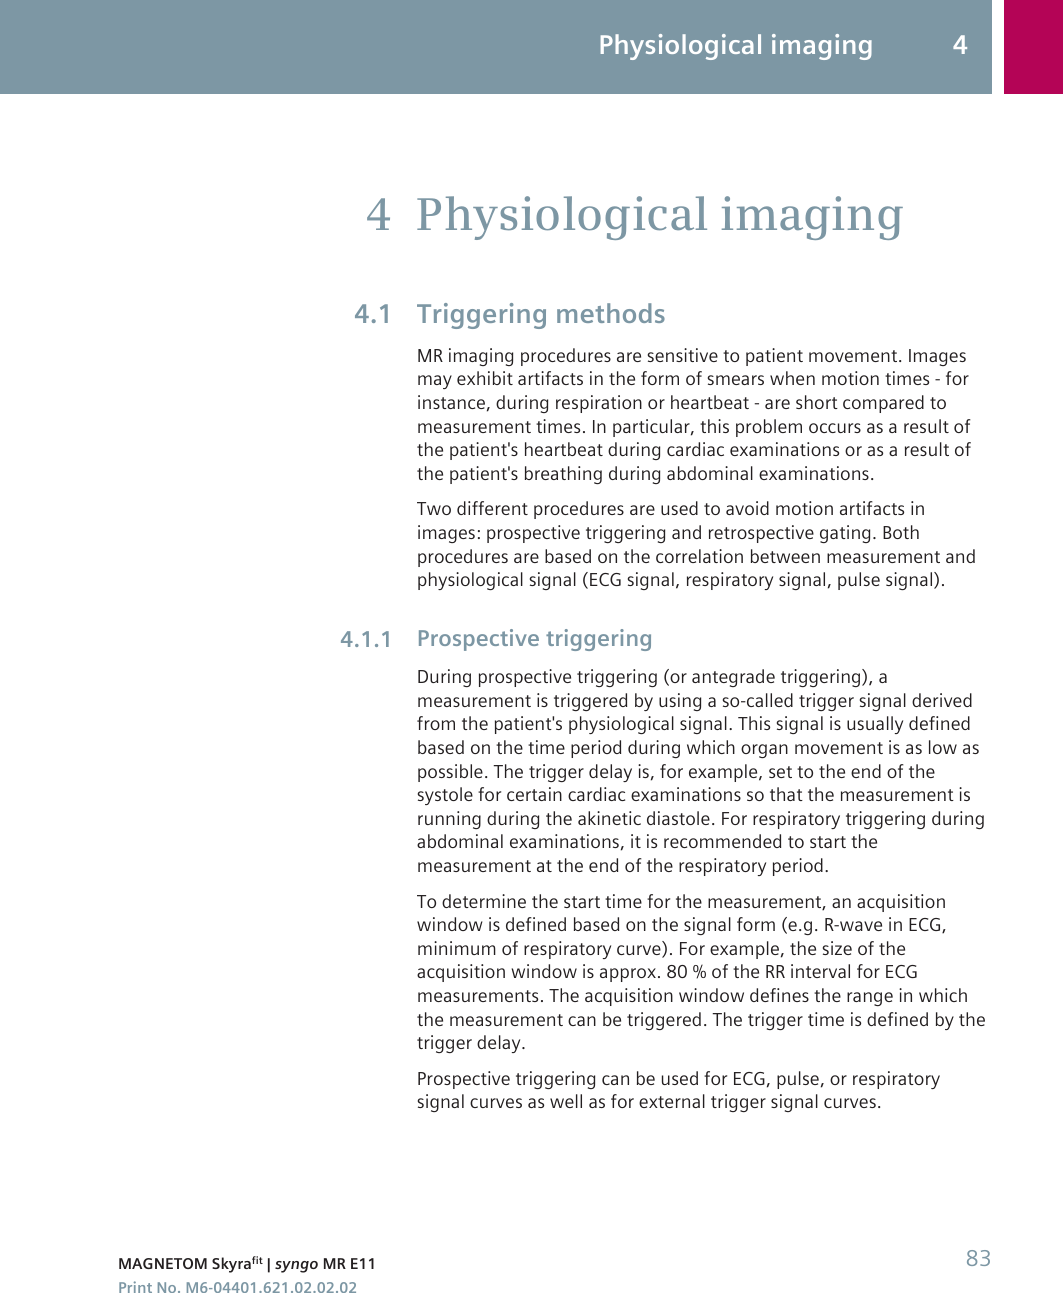 Physiological imagingTriggering methodsMR imaging procedures are sensitive to patient movement. Imagesmay exhibit artifacts in the form of smears when motion times - forinstance, during respiration or heartbeat - are short compared tomeasurement times. In particular, this problem occurs as a result ofthe patient&apos;s heartbeat during cardiac examinations or as a result ofthe patient&apos;s breathing during abdominal examinations.Two different procedures are used to avoid motion artifacts inimages: prospective triggering and retrospective gating. Bothprocedures are based on the correlation between measurement andphysiological signal (ECG signal, respiratory signal, pulse signal).Prospective triggeringDuring prospective triggering (or antegrade triggering), ameasurement is triggered by using a so-called trigger signal derivedfrom the patient&apos;s physiological signal. This signal is usually definedbased on the time period during which organ movement is as low aspossible. The trigger delay is, for example, set to the end of thesystole for certain cardiac examinations so that the measurement isrunning during the akinetic diastole. For respiratory triggering duringabdominal examinations, it is recommended to start themeasurement at the end of the respiratory period.To determine the start time for the measurement, an acquisitionwindow is defined based on the signal form (e.g. R-wave in ECG,minimum of respiratory curve). For example, the size of theacquisition window is approx. 80 % of the RR interval for ECGmeasurements. The acquisition window defines the range in whichthe measurement can be triggered. The trigger time is defined by thetrigger delay.Prospective triggering can be used for ECG, pulse, or respiratorysignal curves as well as for external trigger signal curves.44.14.1.1Physiological imaging 4MAGNETOM Skyrafit | syngo MR E11 83Print No. M6-04401.621.02.02.02